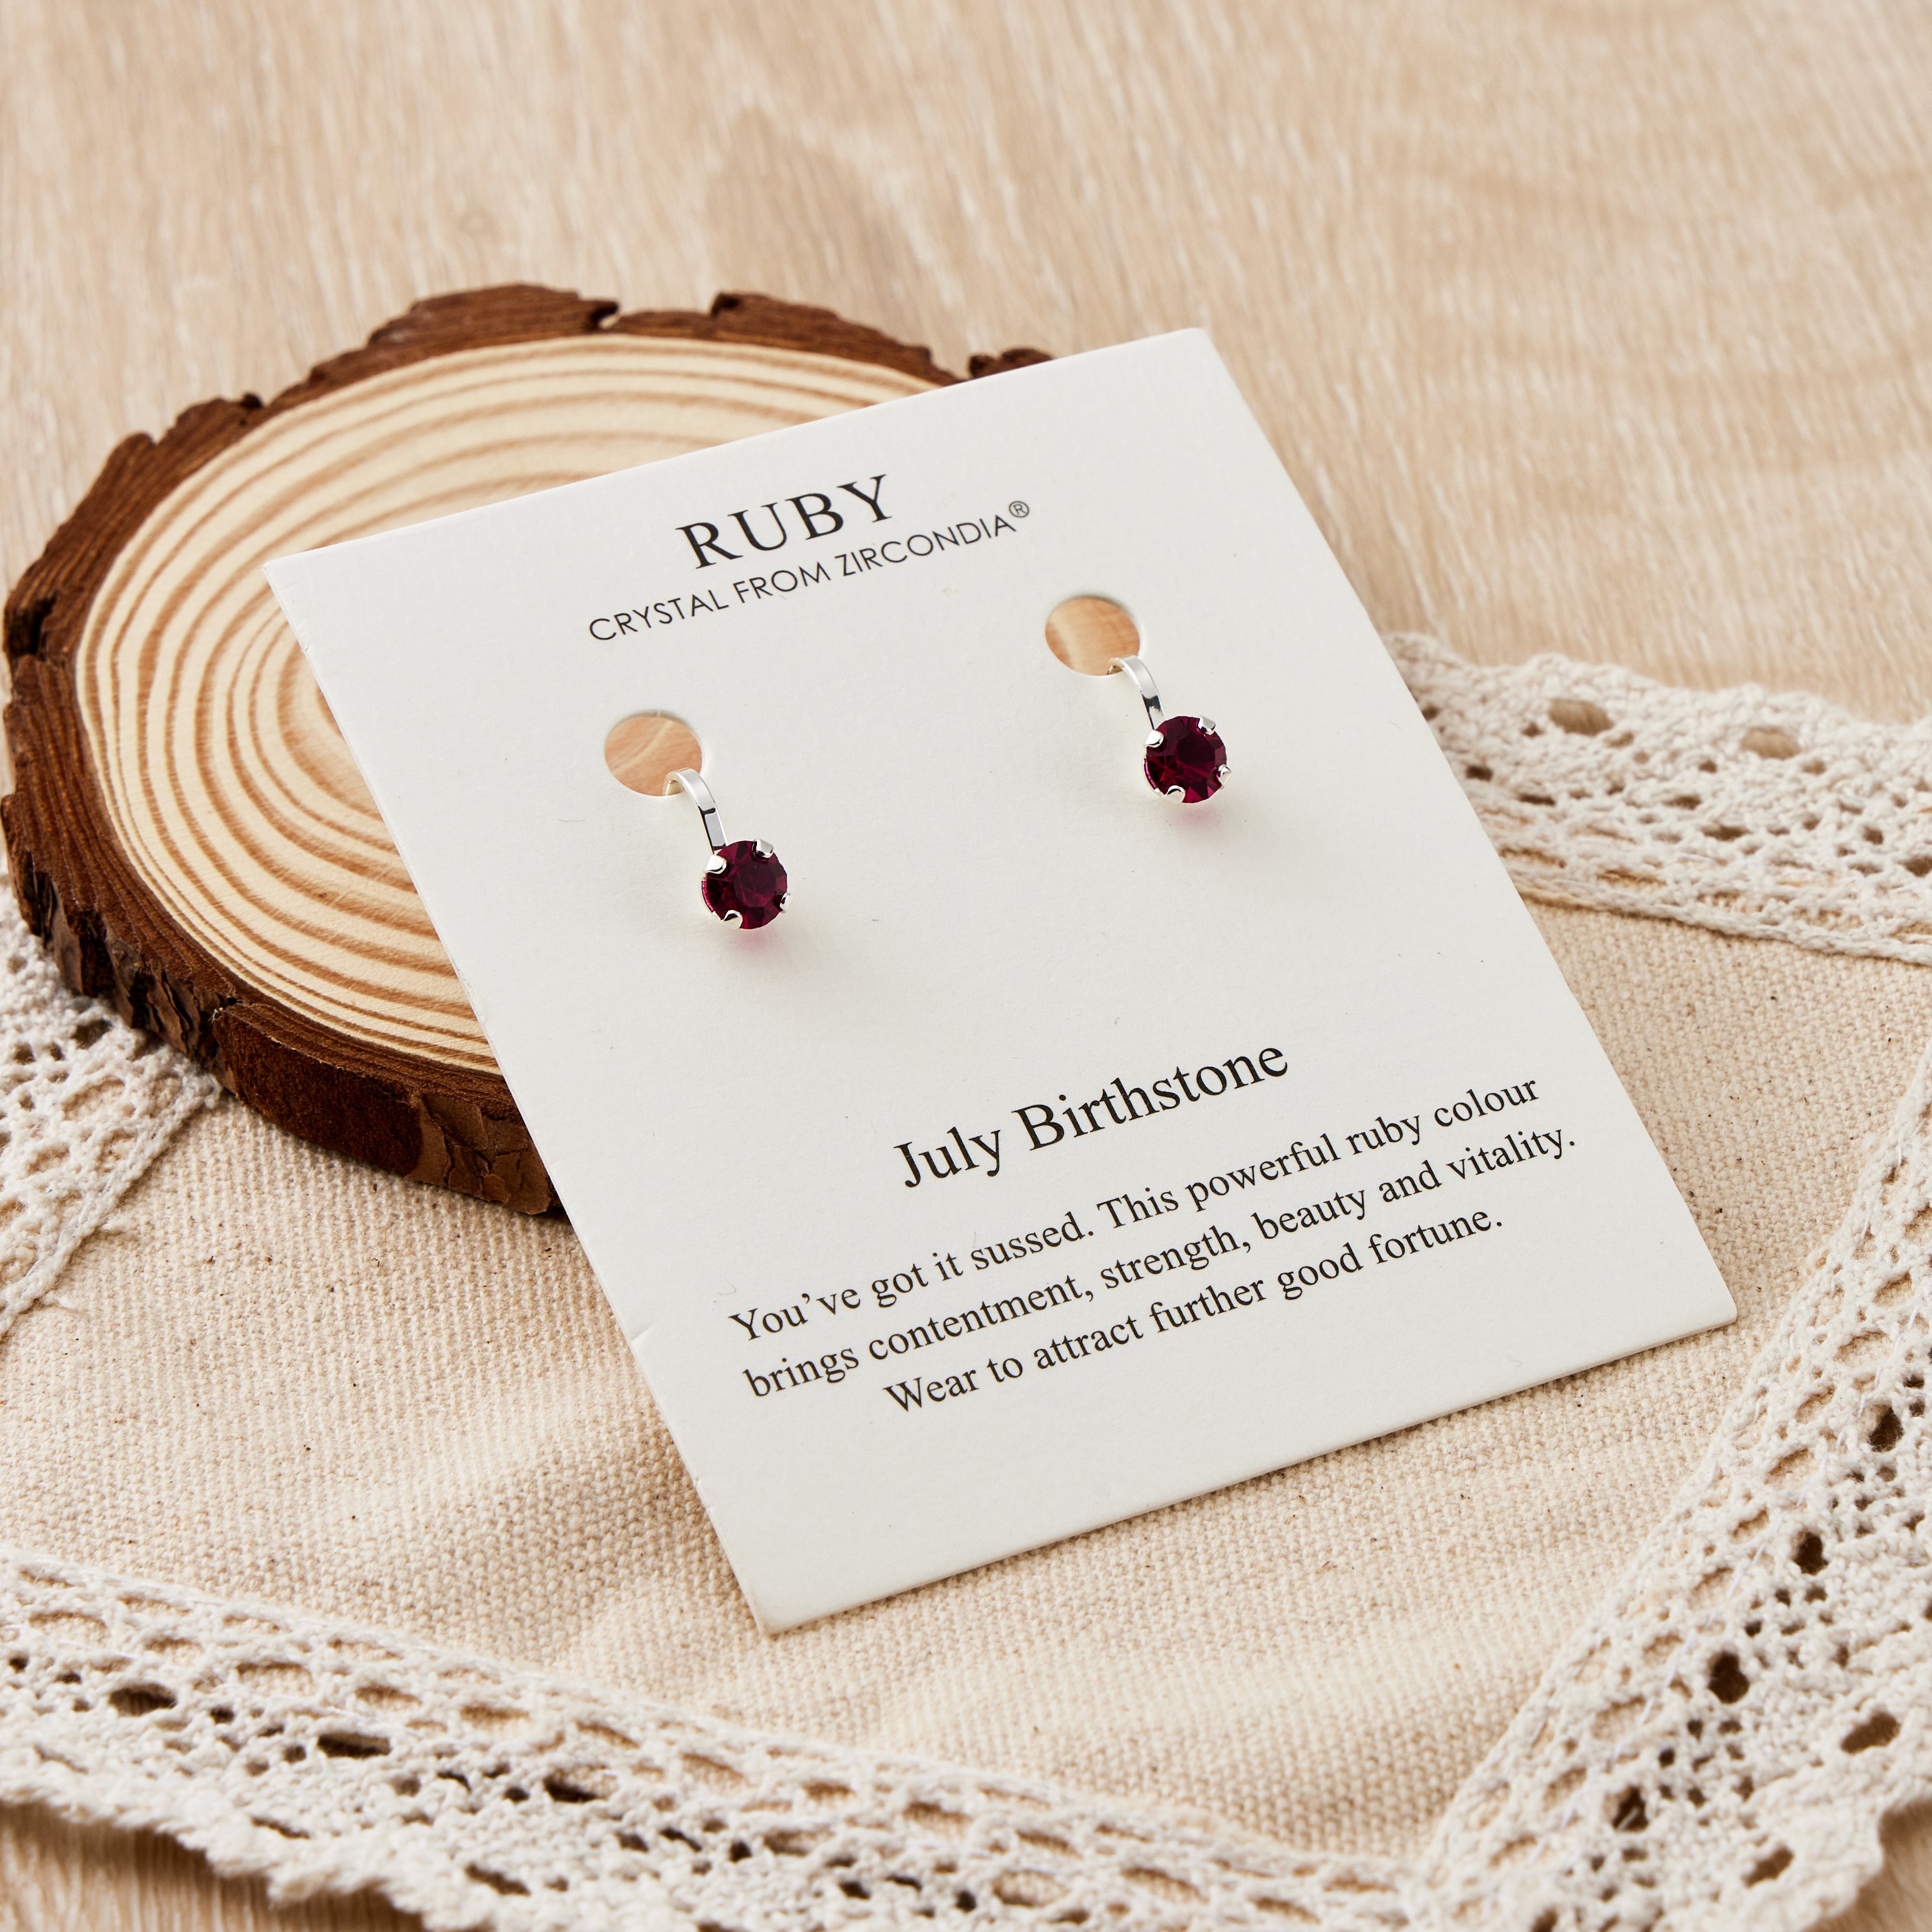 July (Ruby) Birthstone Clip On Earrings Created with Zircondia® Crystals